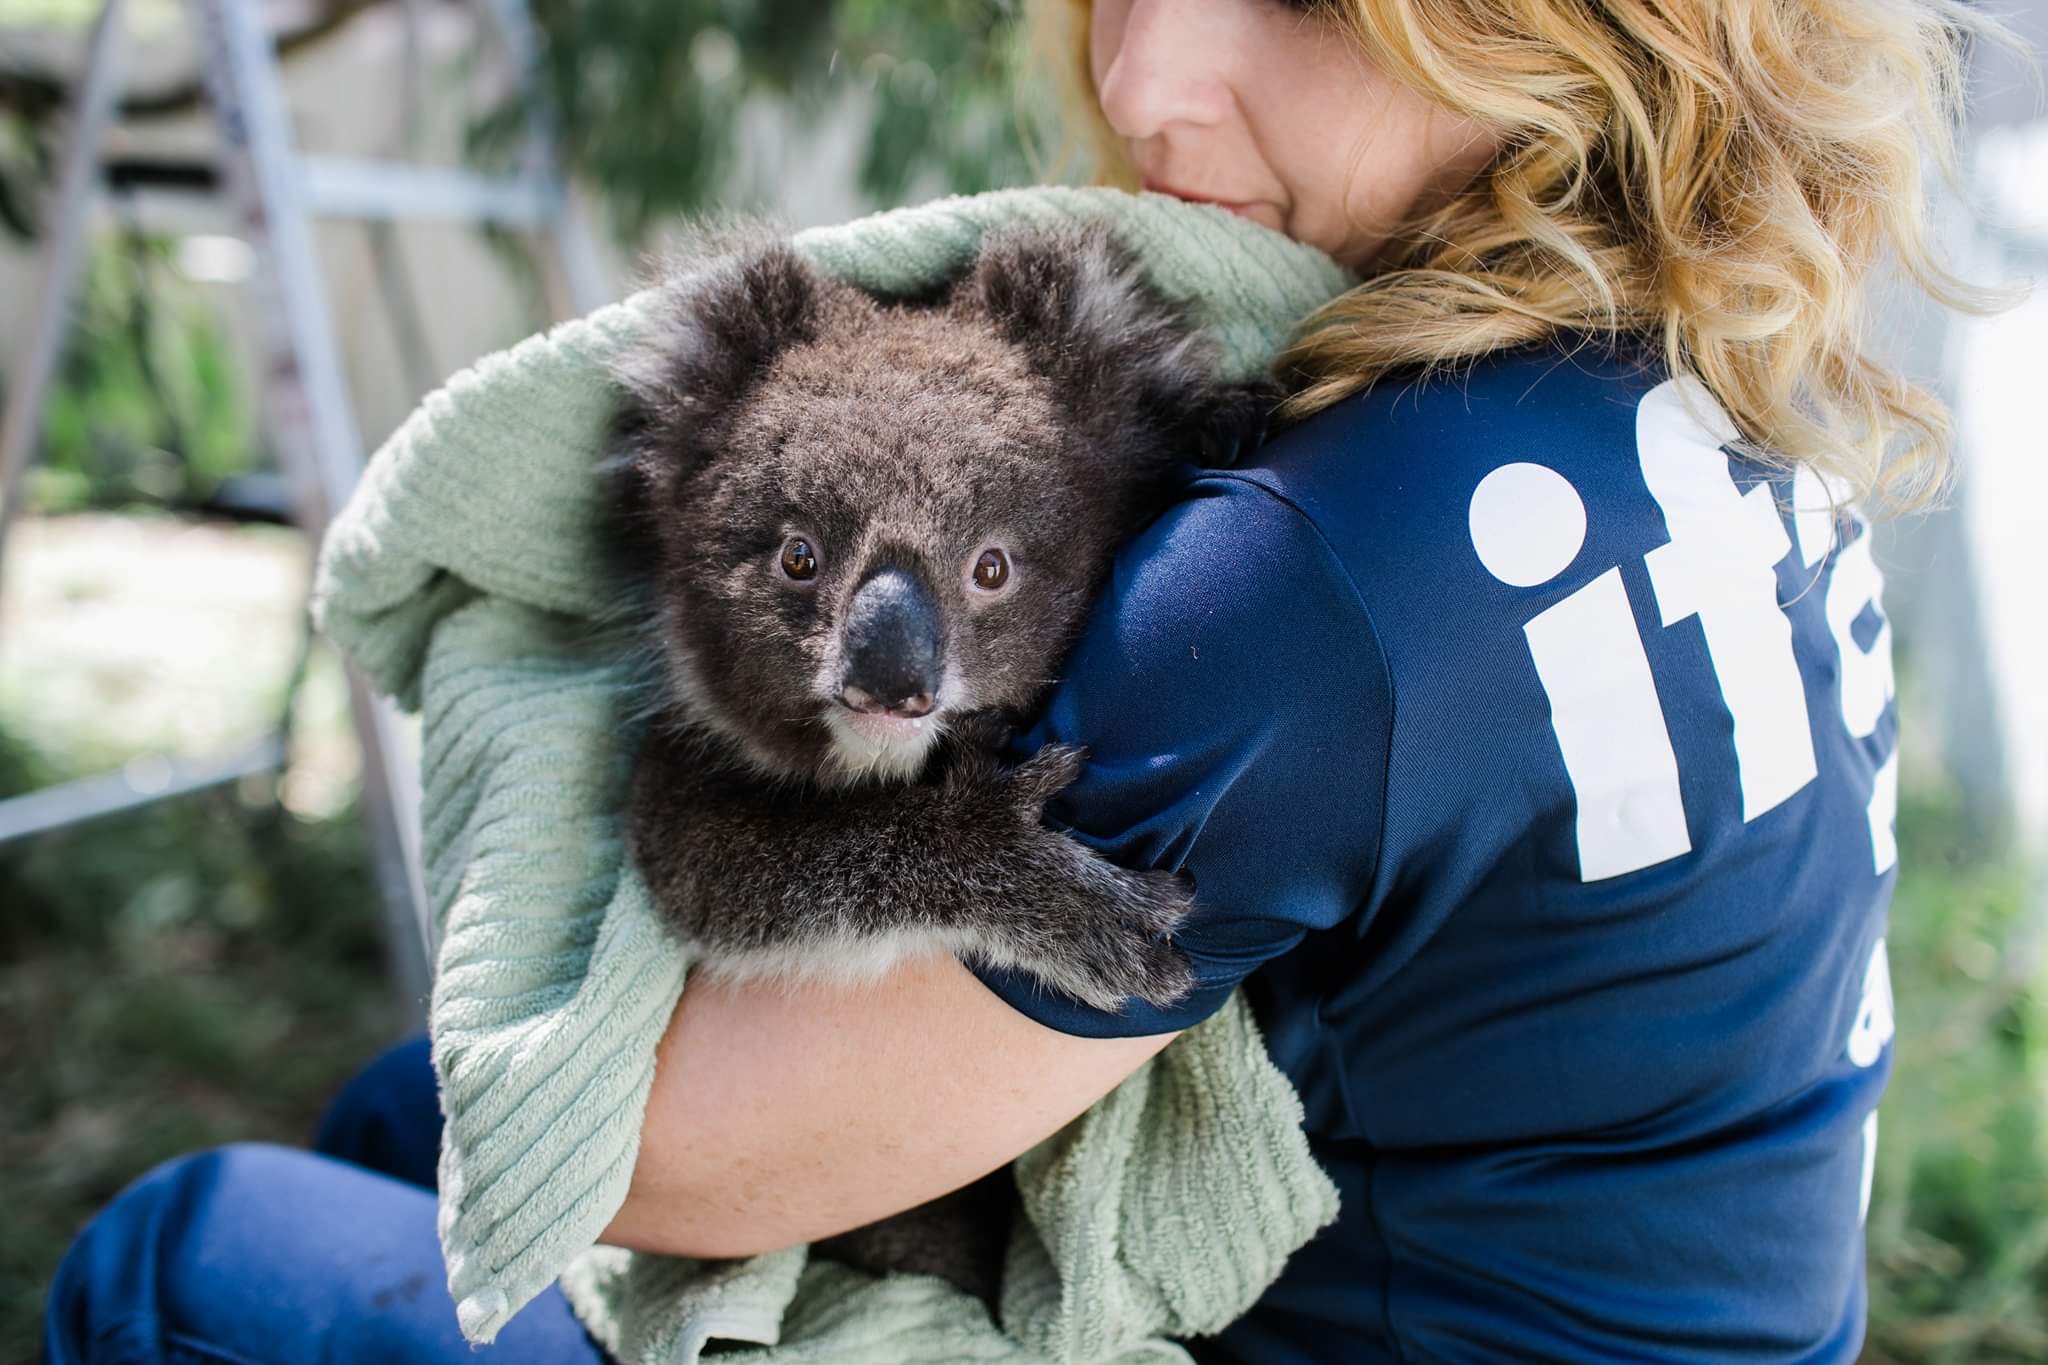 Working With Ifaw To Help Fund Pioneering And Innovative Ways To Help All Species Flourish